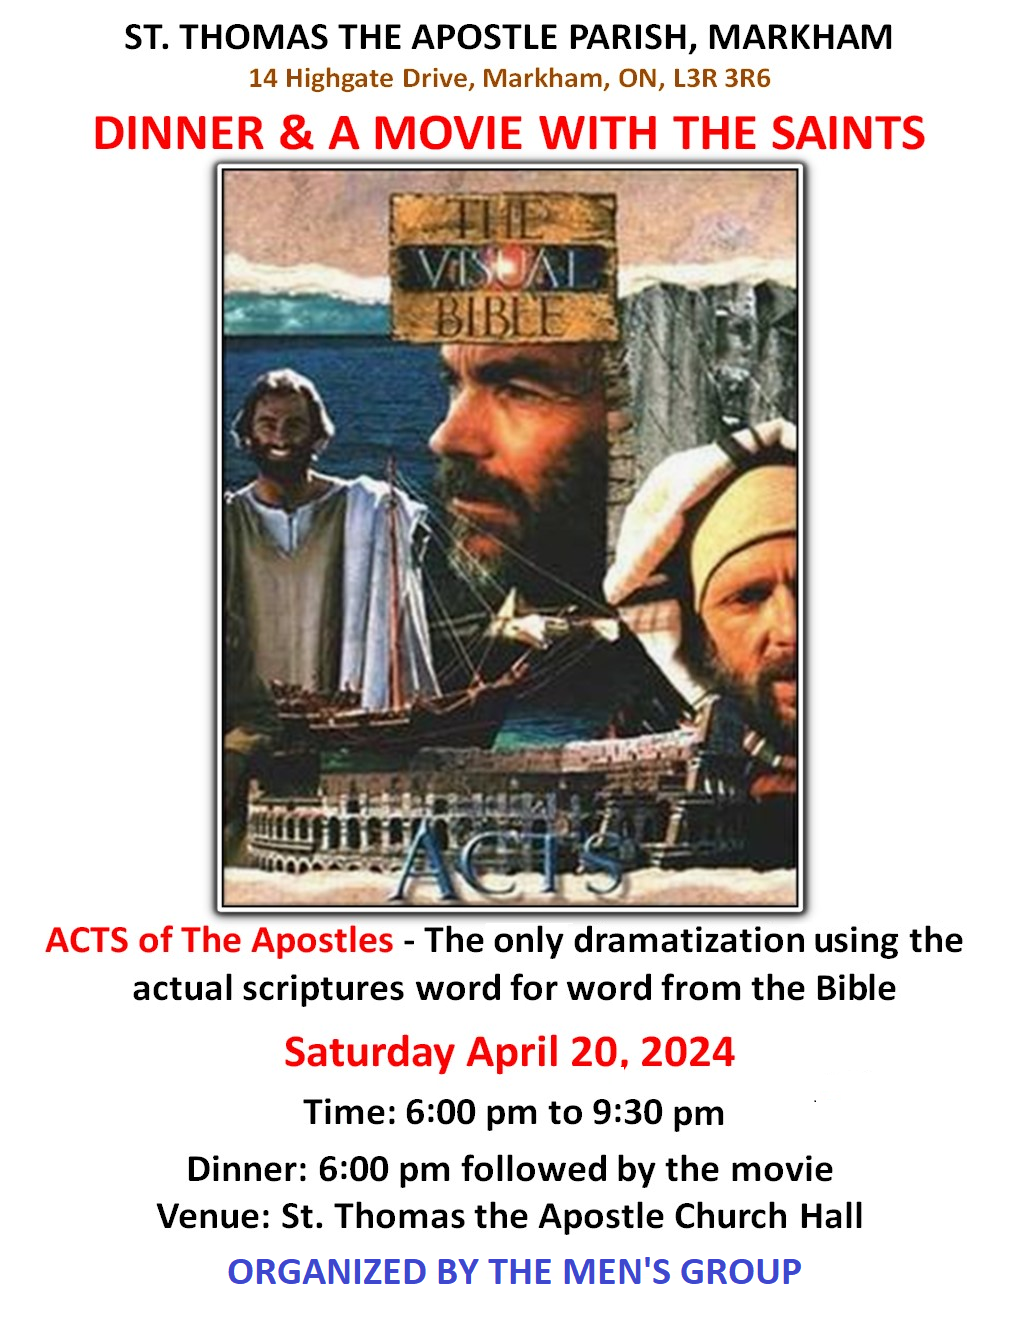 ACTS flyer 2024